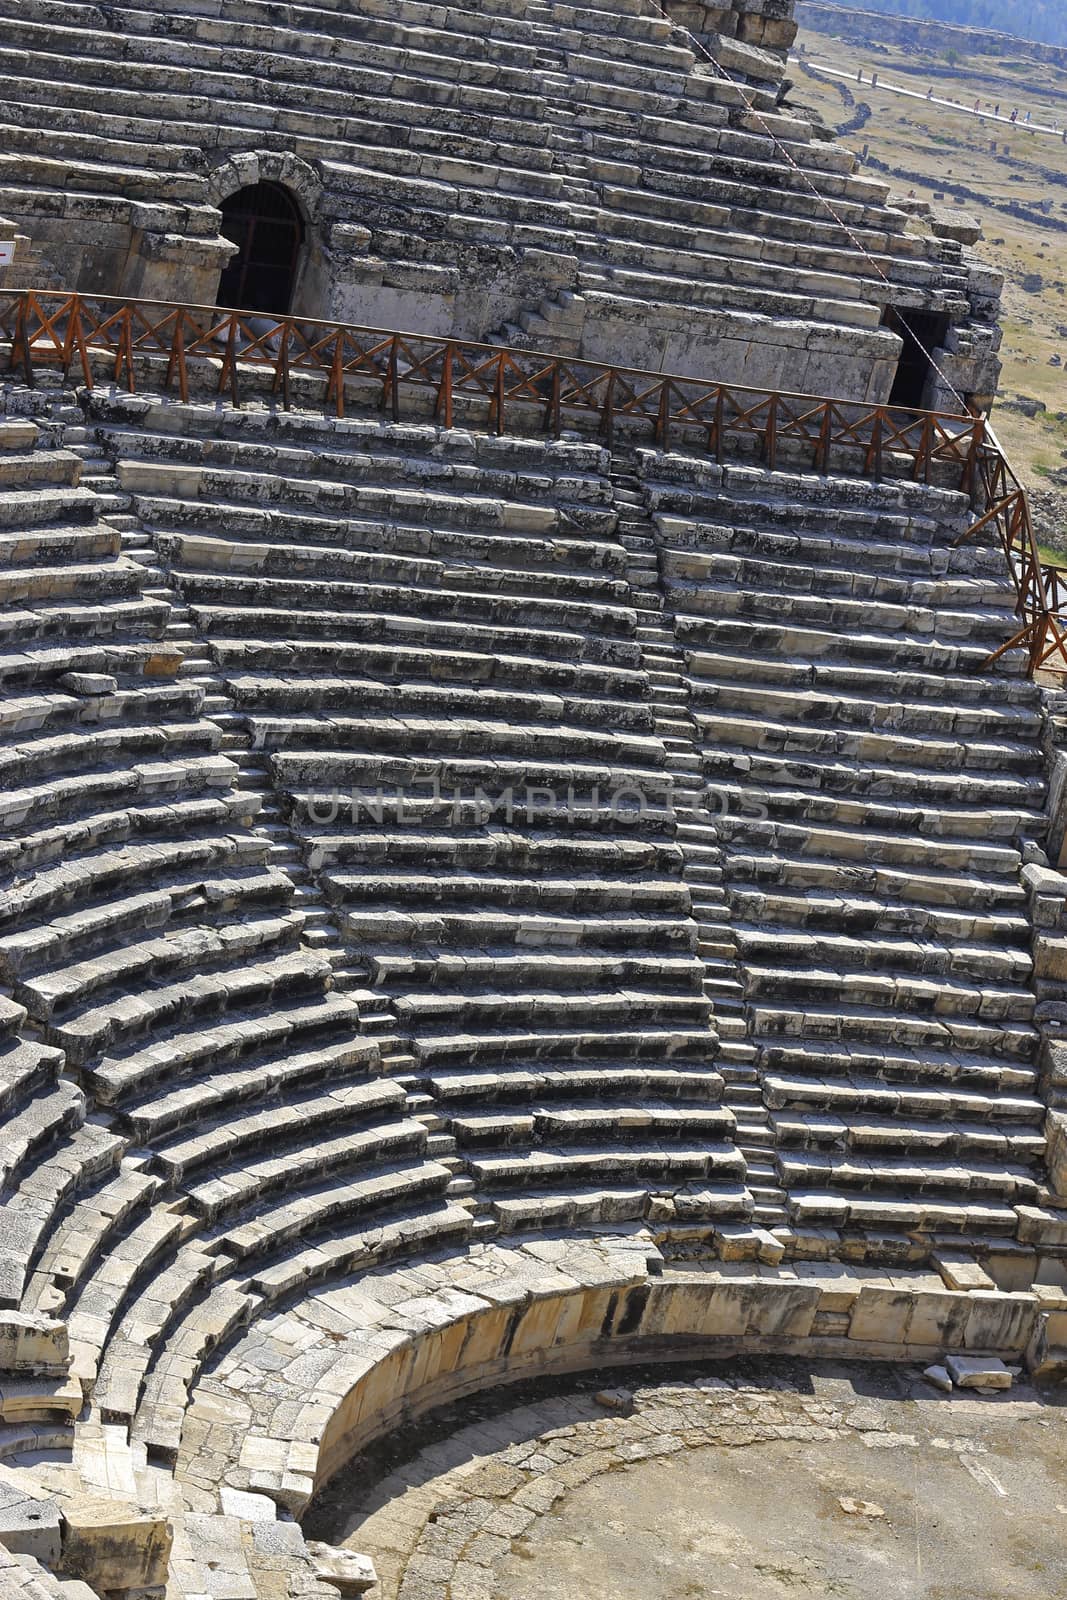 Ruins of theater in ancient town Hierapolis Turkey